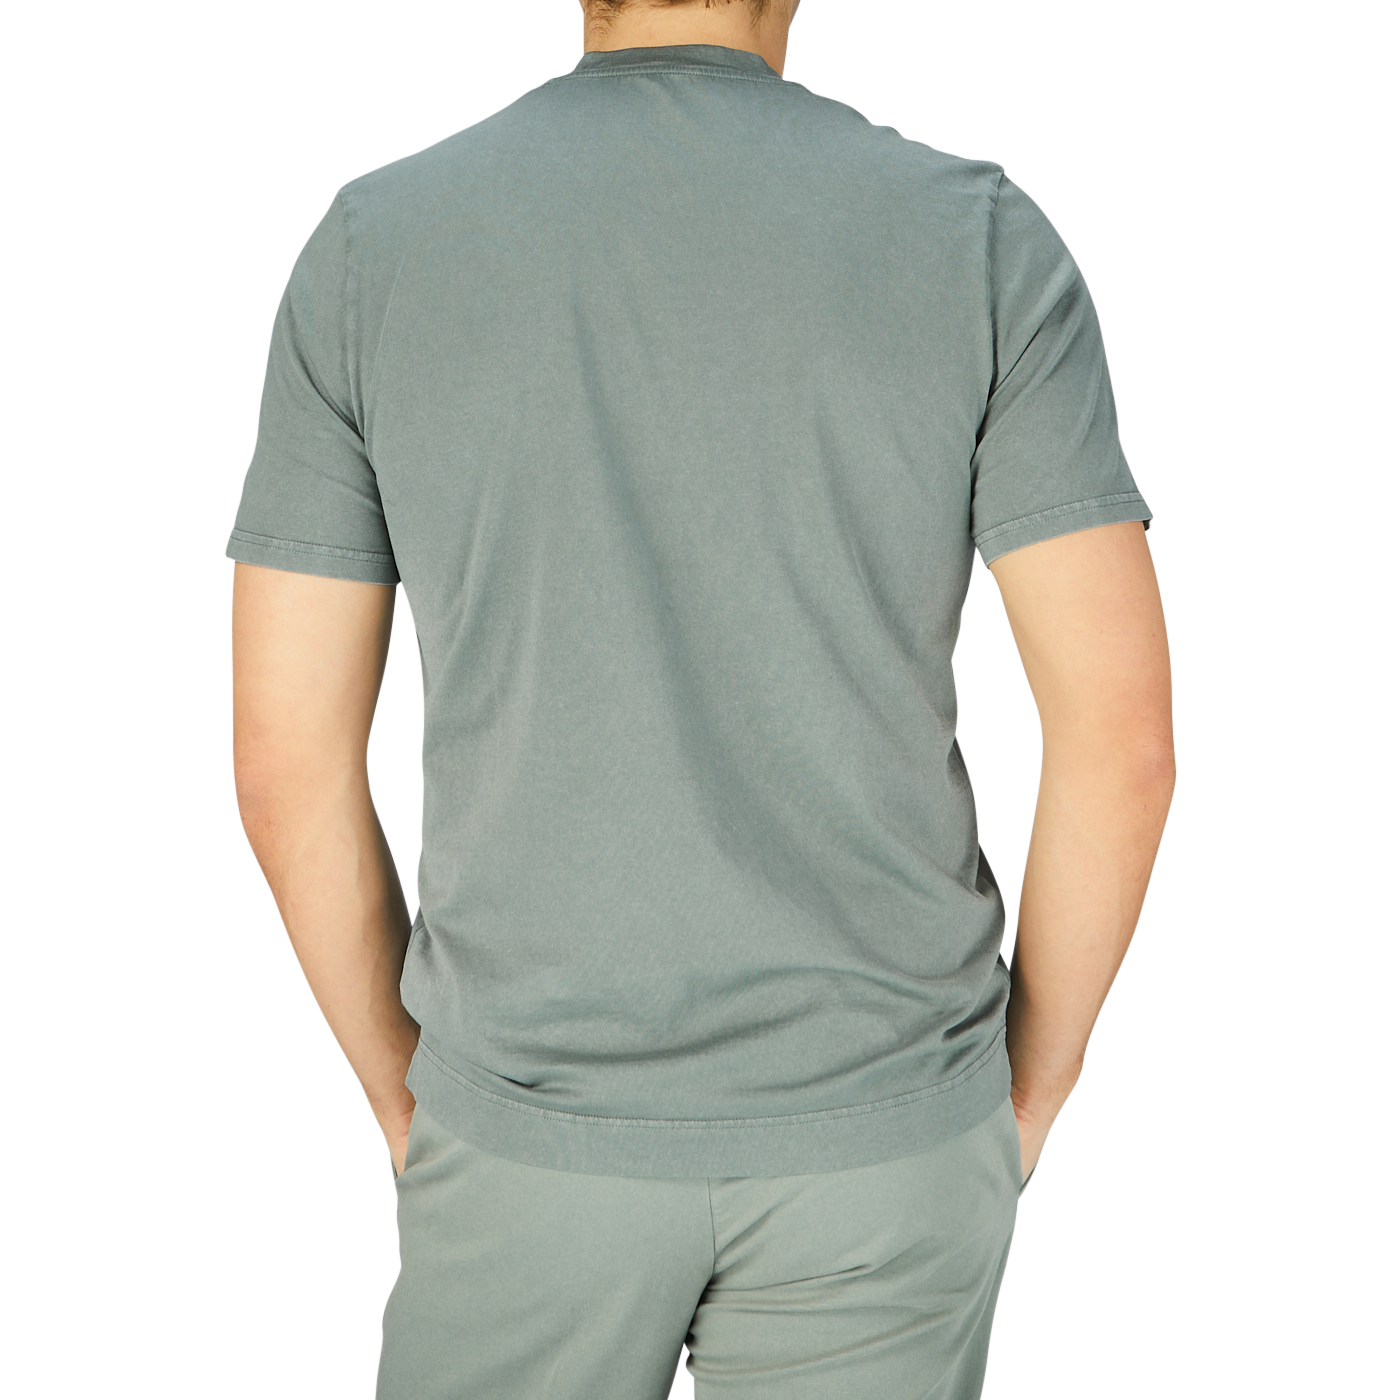 The back view of a man wearing a Fedeli Olive Green Organic Cotton T-Shirt.